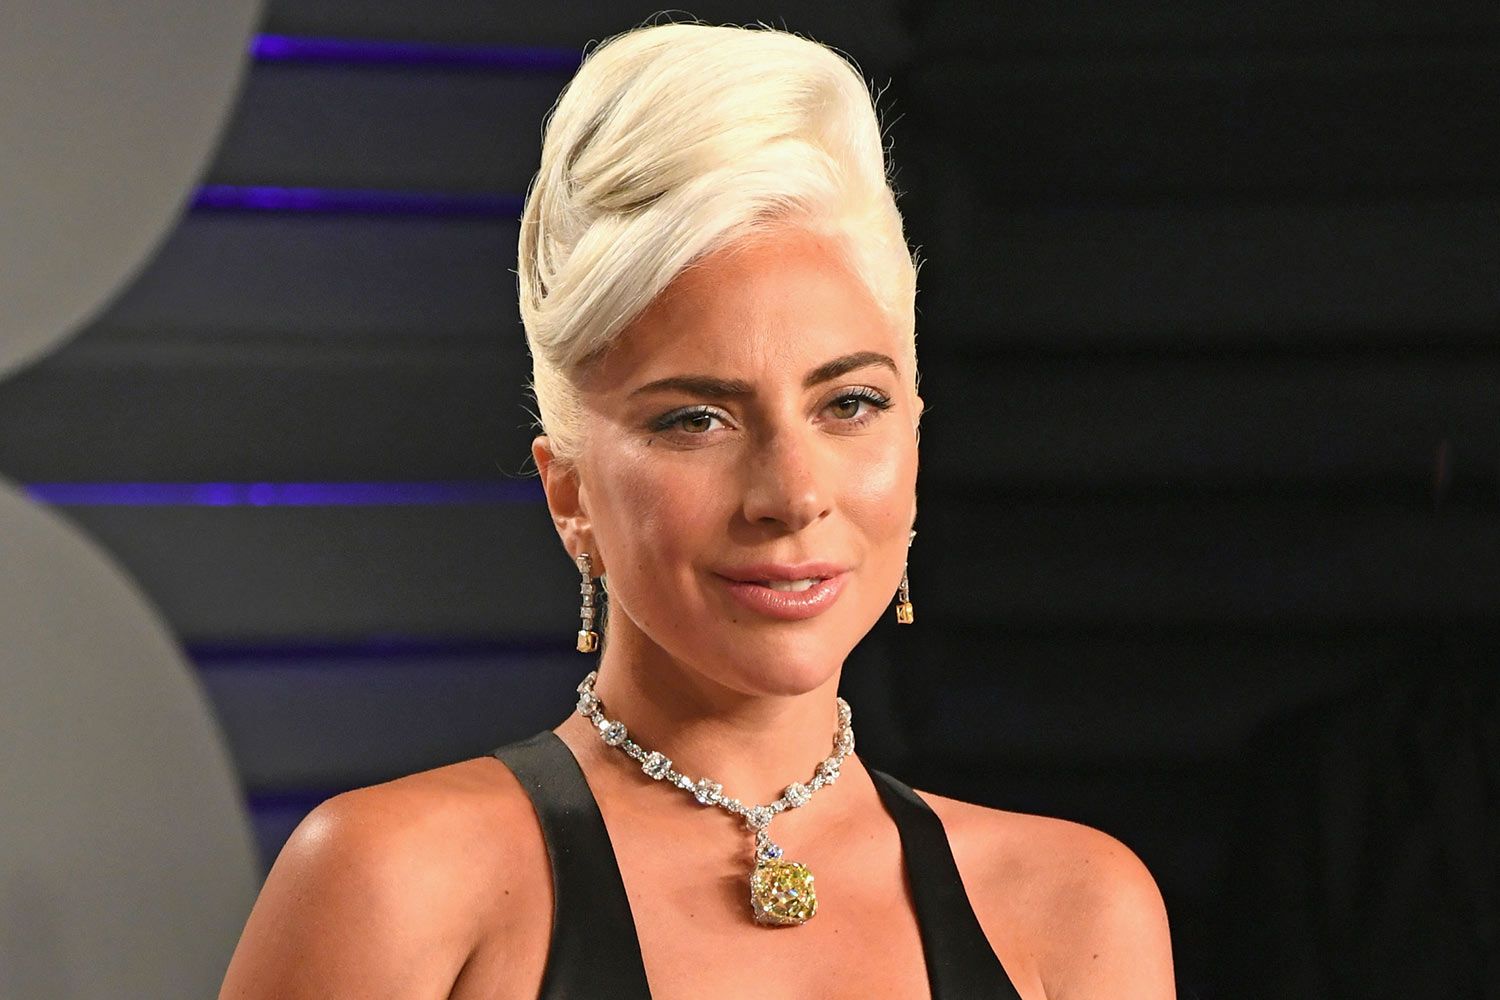 Lady Gaga Says She's 'Praying for Everyone' Who's Had a 'Very Hard' Year: 'My Heart Is with You'